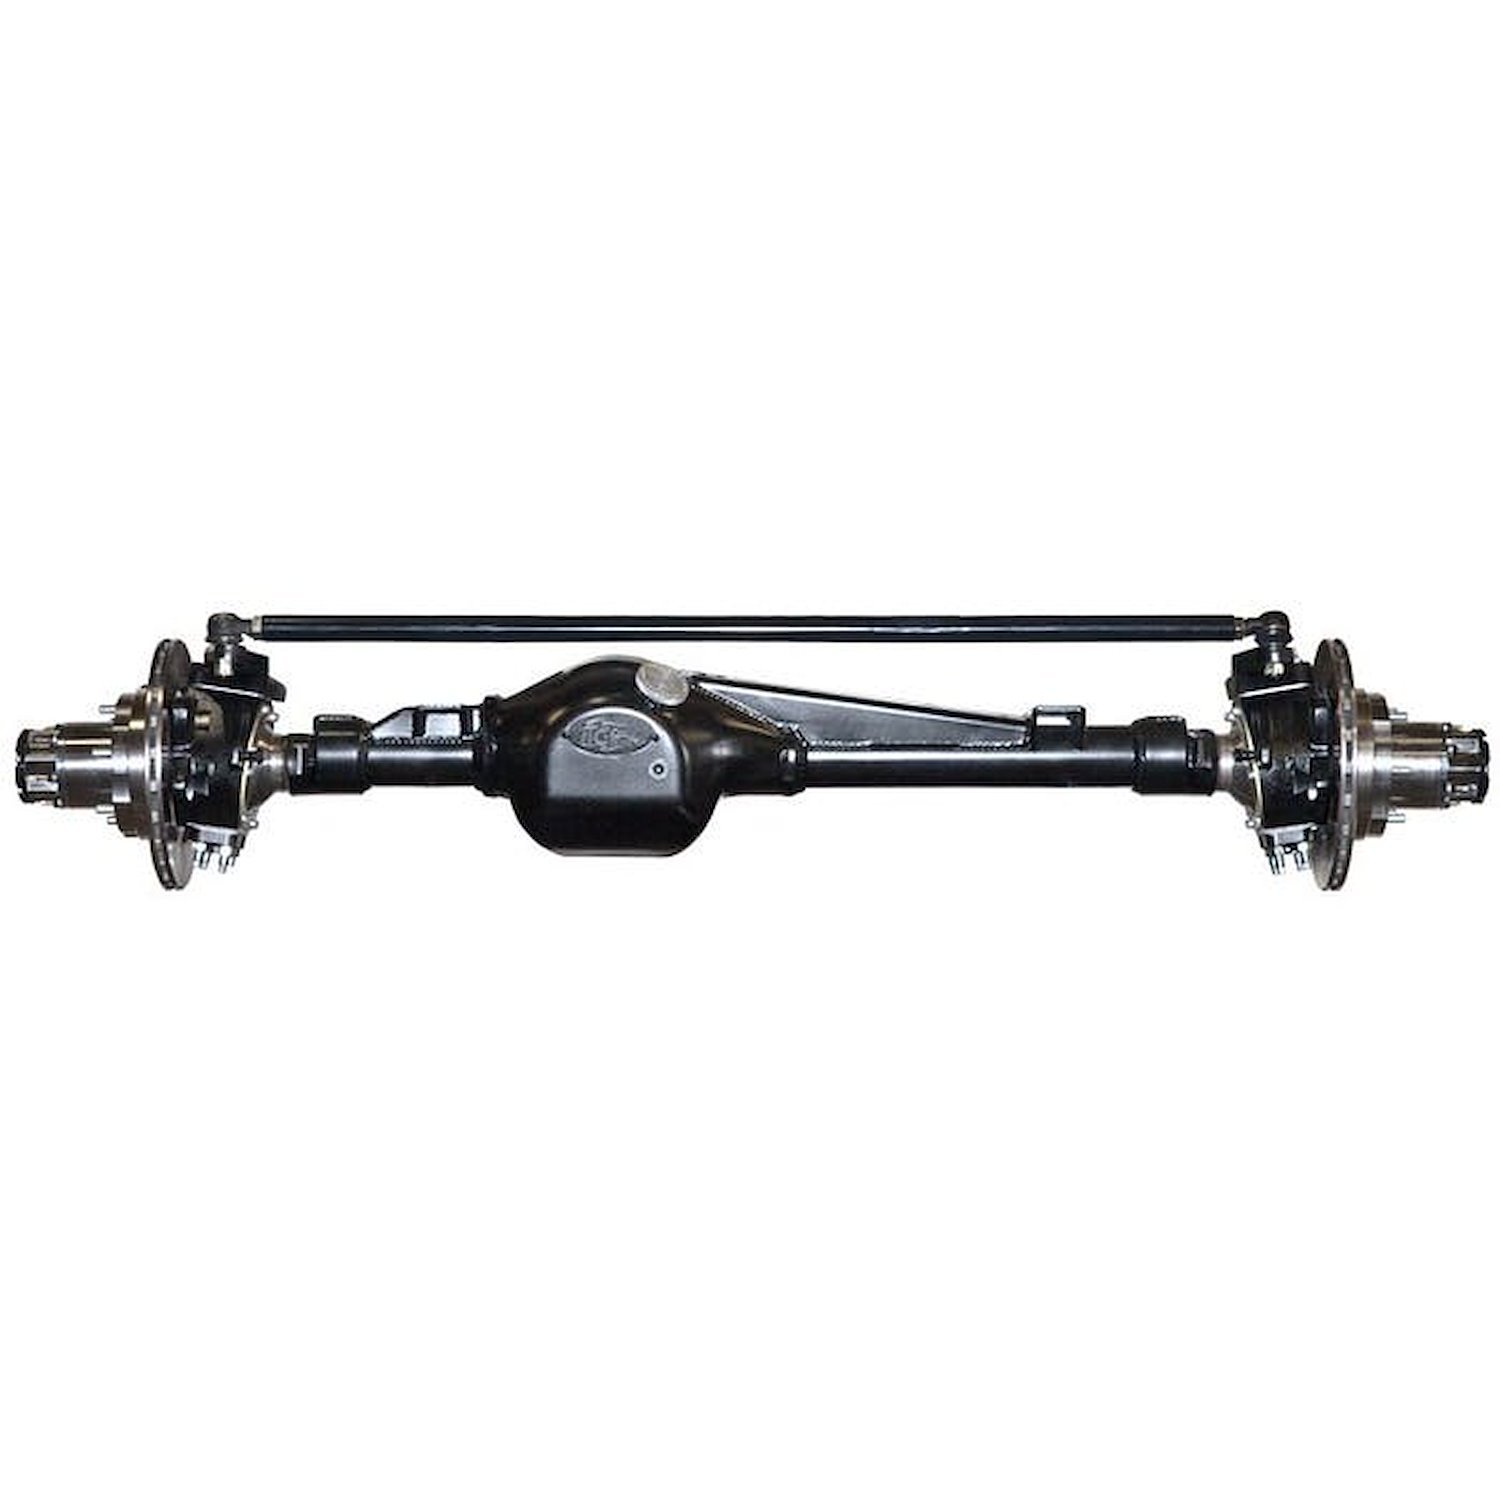 301642-1-KIT Rock Assault Fully-Built Front Axles, +5 Width, RHD, 4-Cylinder, 4.88, Grizzly, Creeper Flanges, Toyota